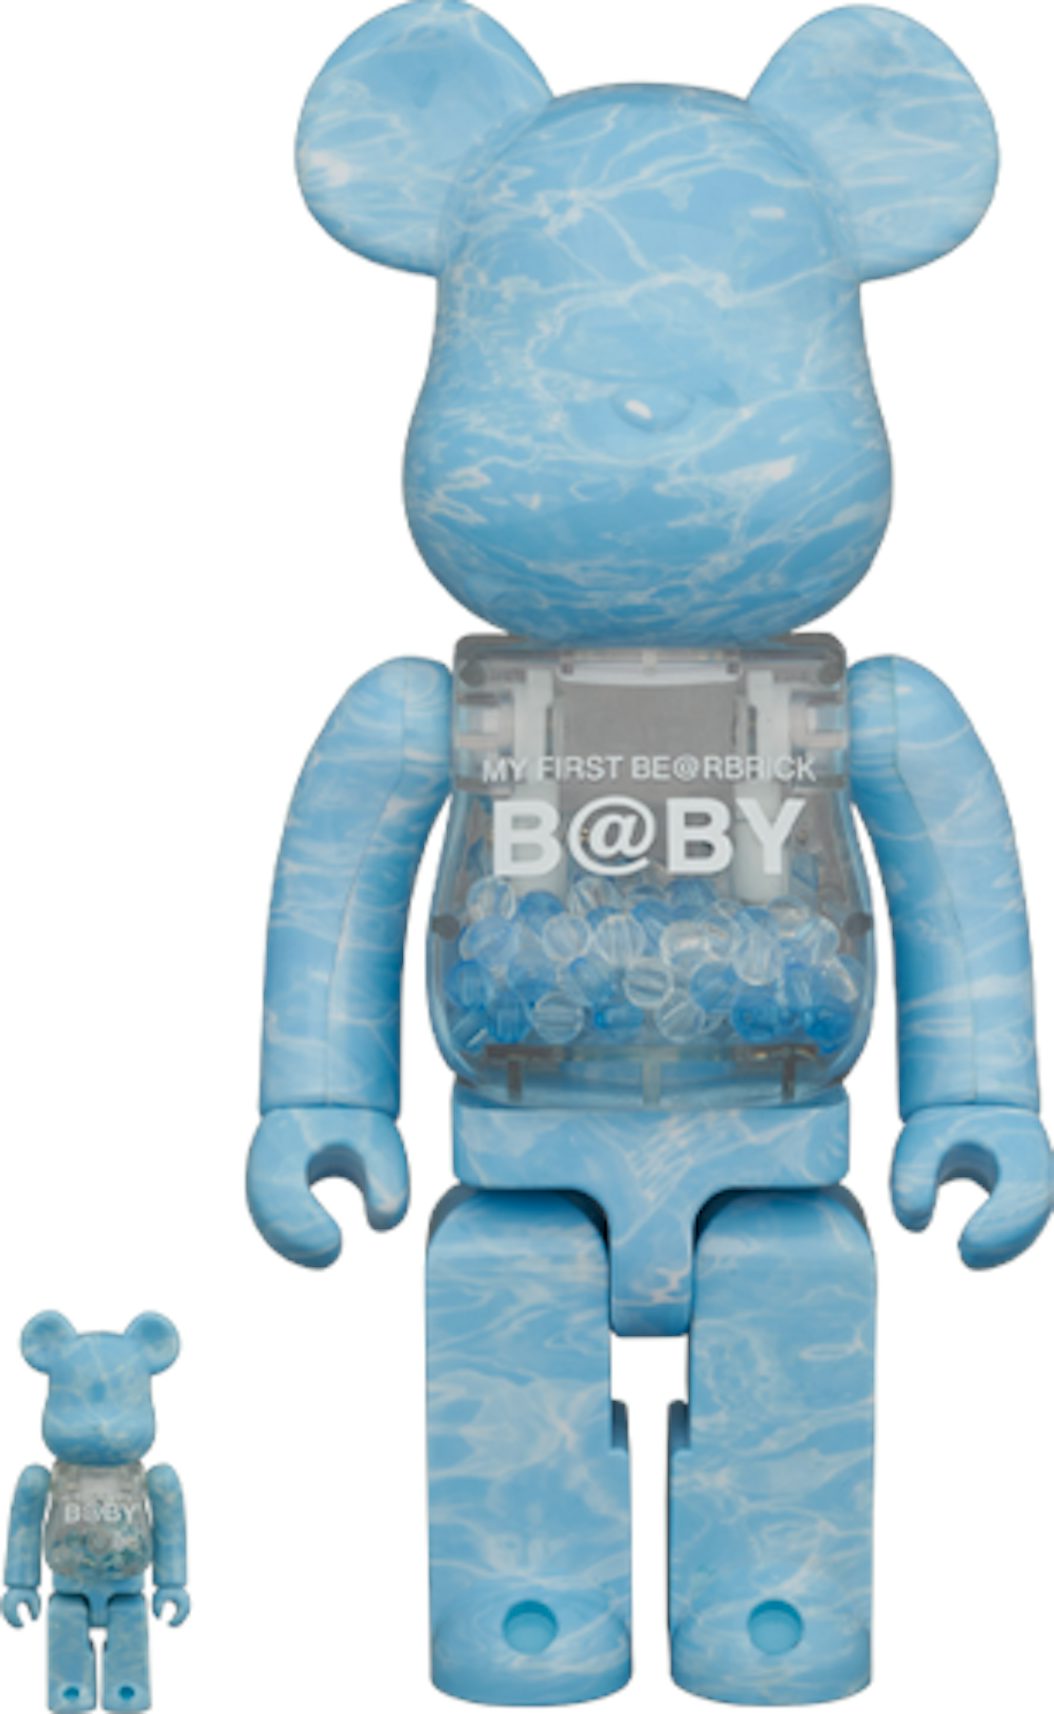 Bearbrick MY FIRST BE @ RBRICK B @ BY WATER CREST Ver. 100% & 400 ...